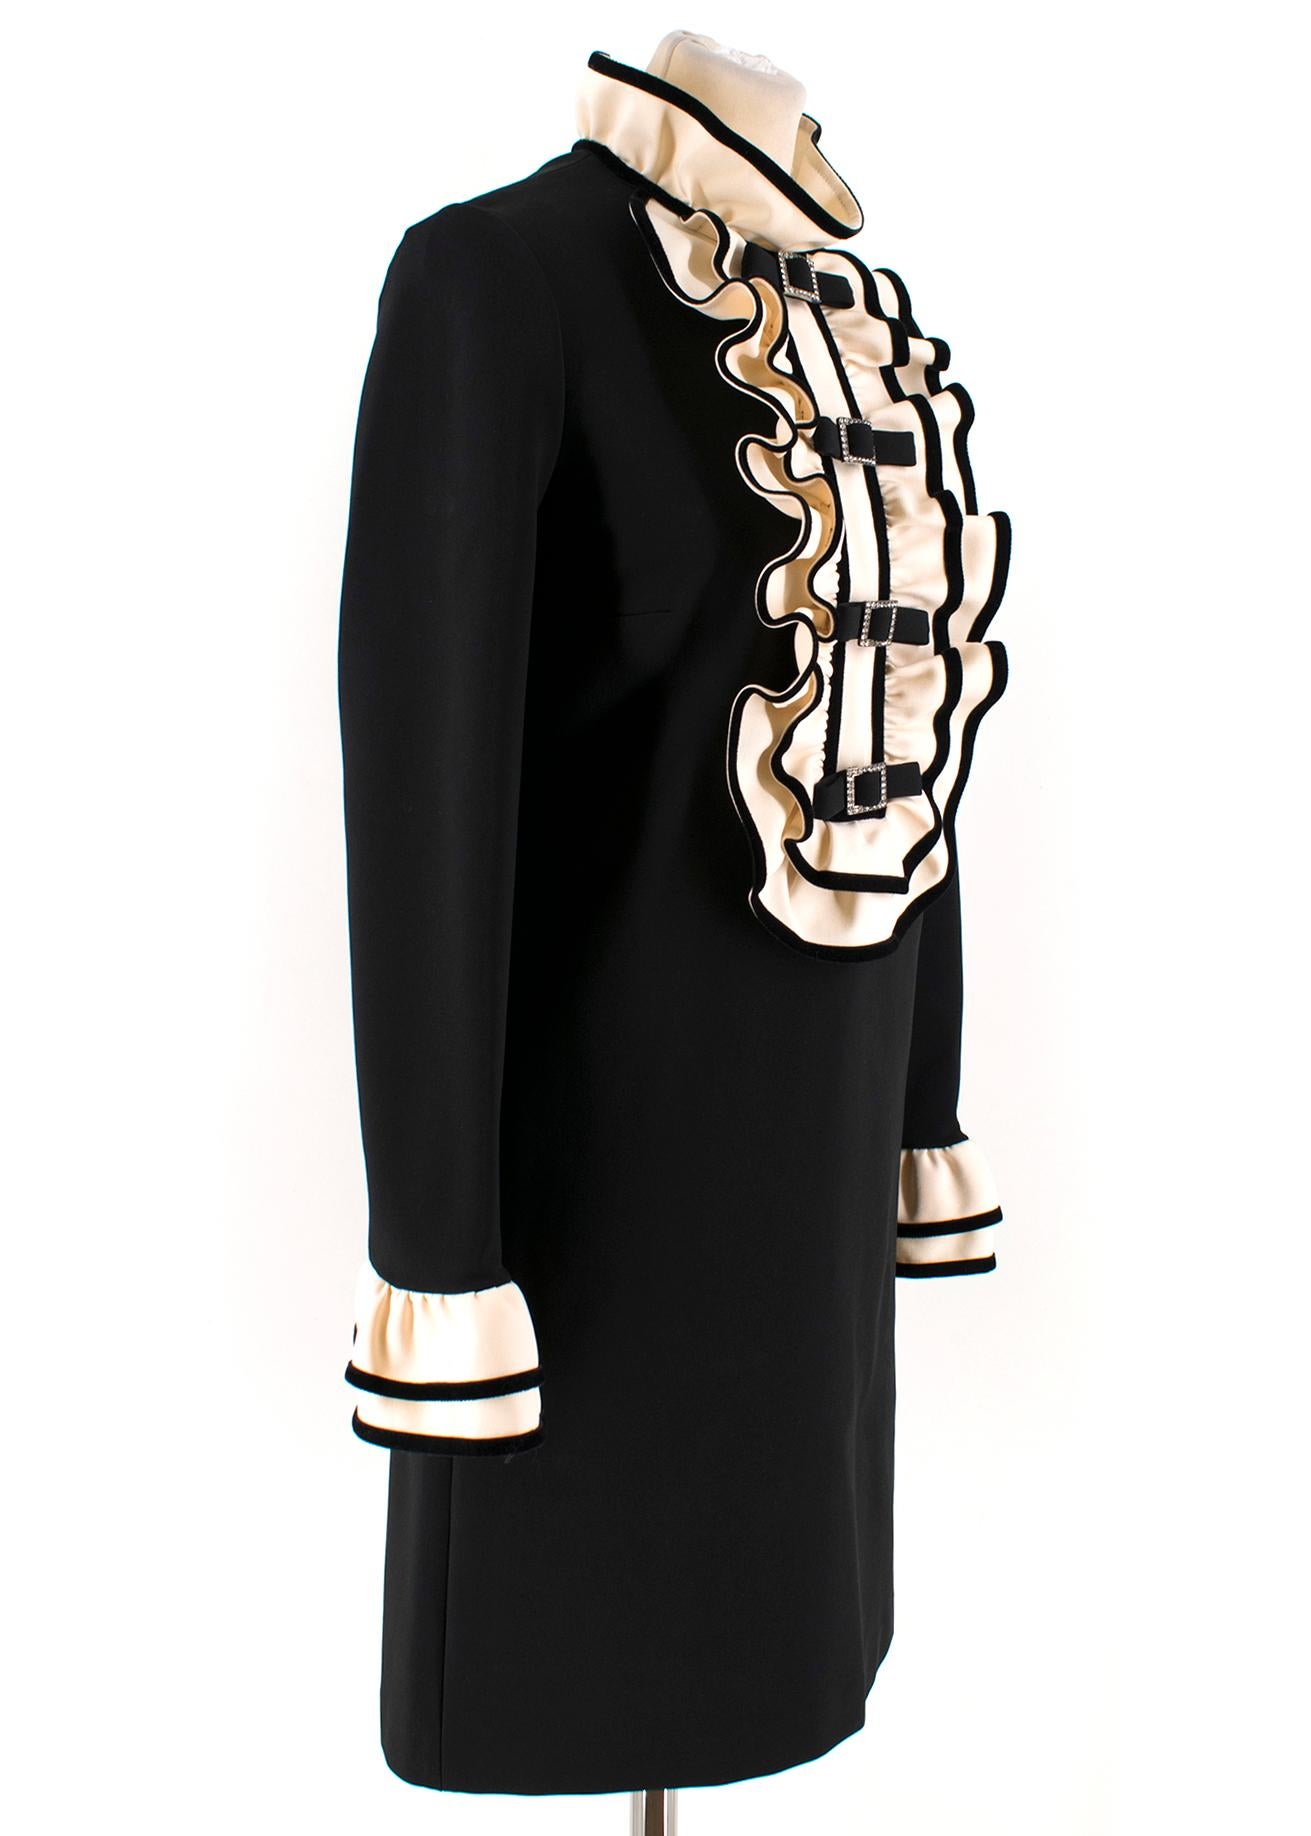 Gucci ruffle-bib black dress

- Black, heavyweight stretch fabric 
- High neck, long sleeves 
- Cream ruffle neck, tiered ruffle cuffs and front bib feature, black velvet-trimmed edges 
- Four front decorative black bows, clear crystal embellished